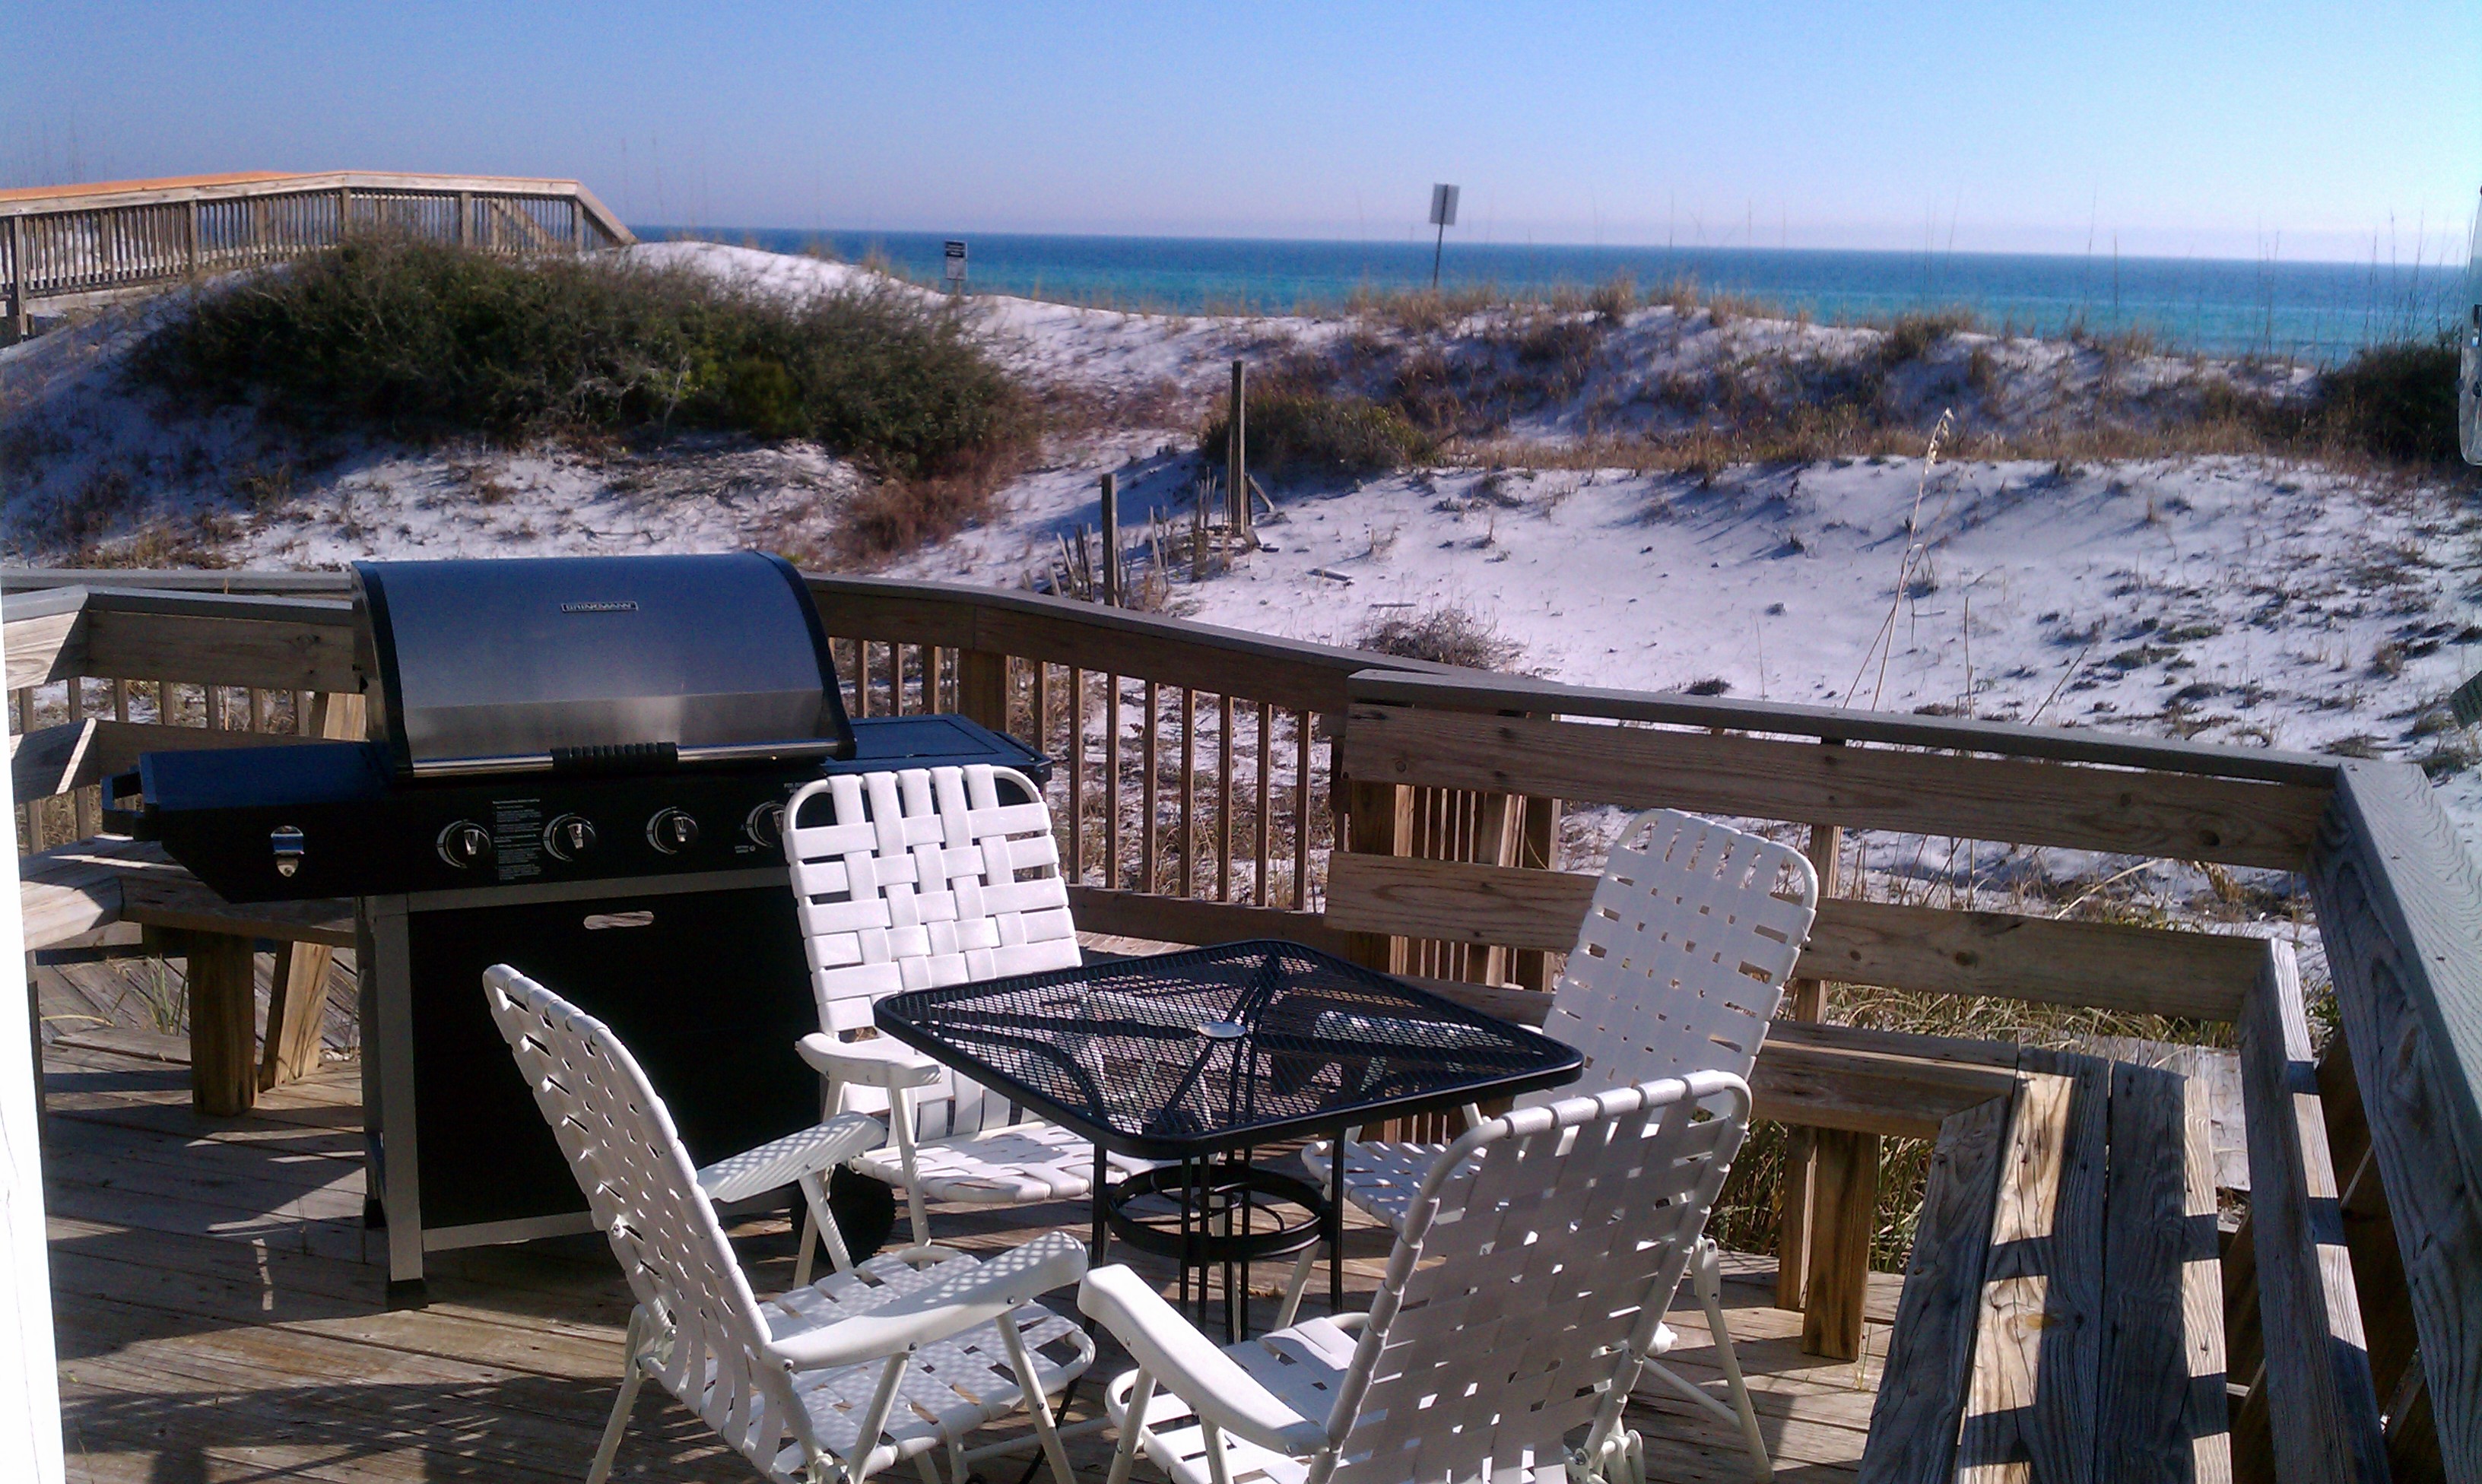 Grill right out back in the dunes. Try that with a condo!